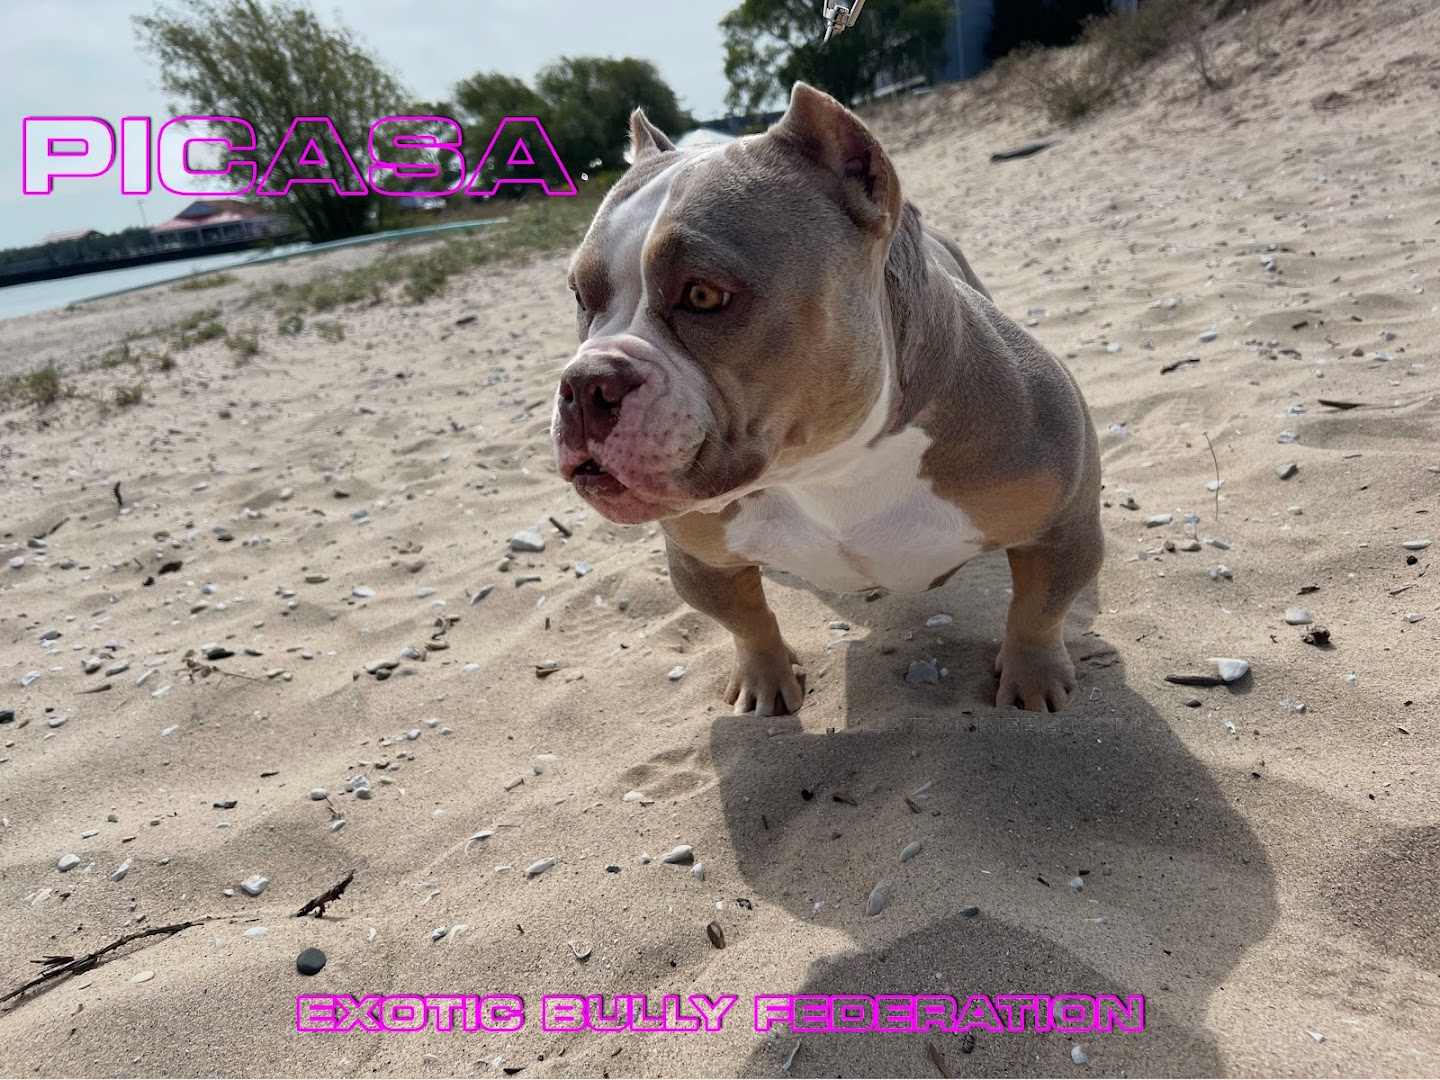 Exotic Bully Federation